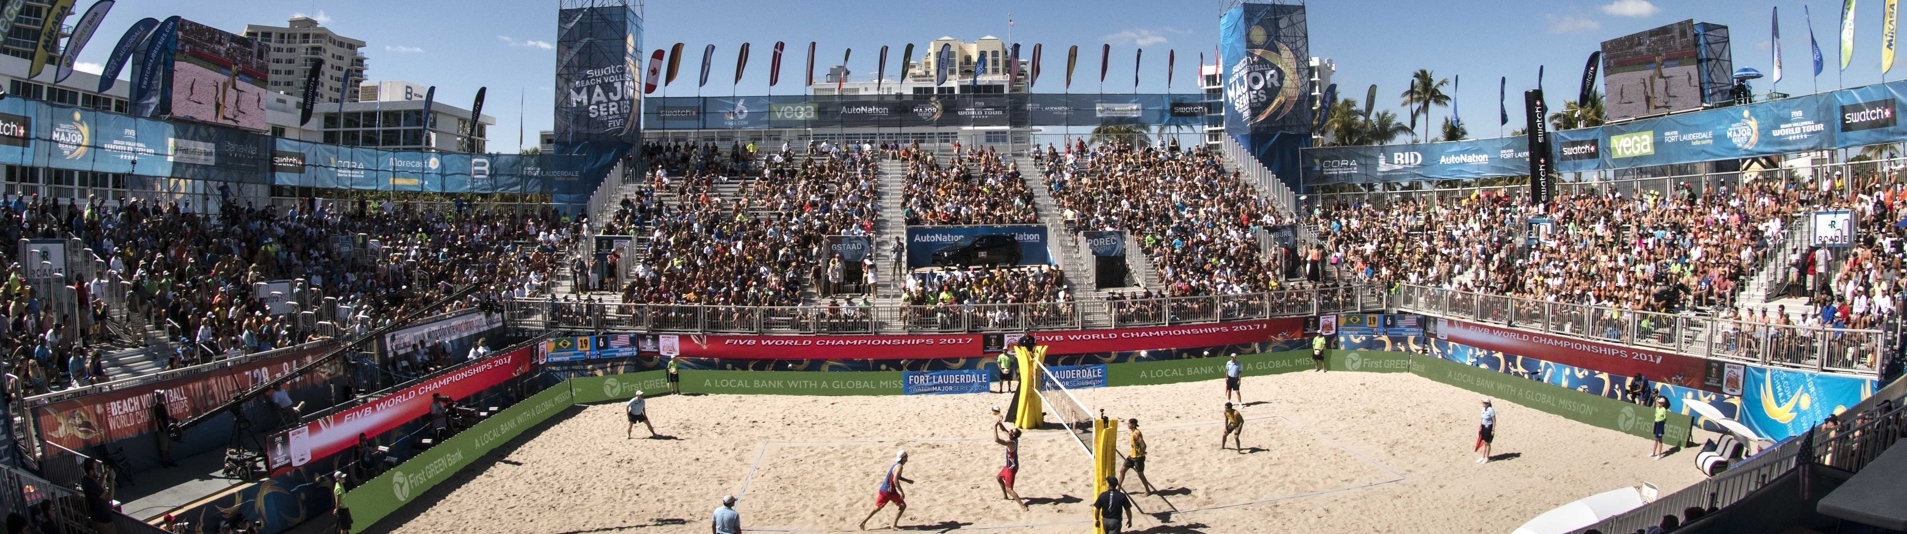 Huge crowds came to witness the #FLTMajor finals on Saturday and Sunday.